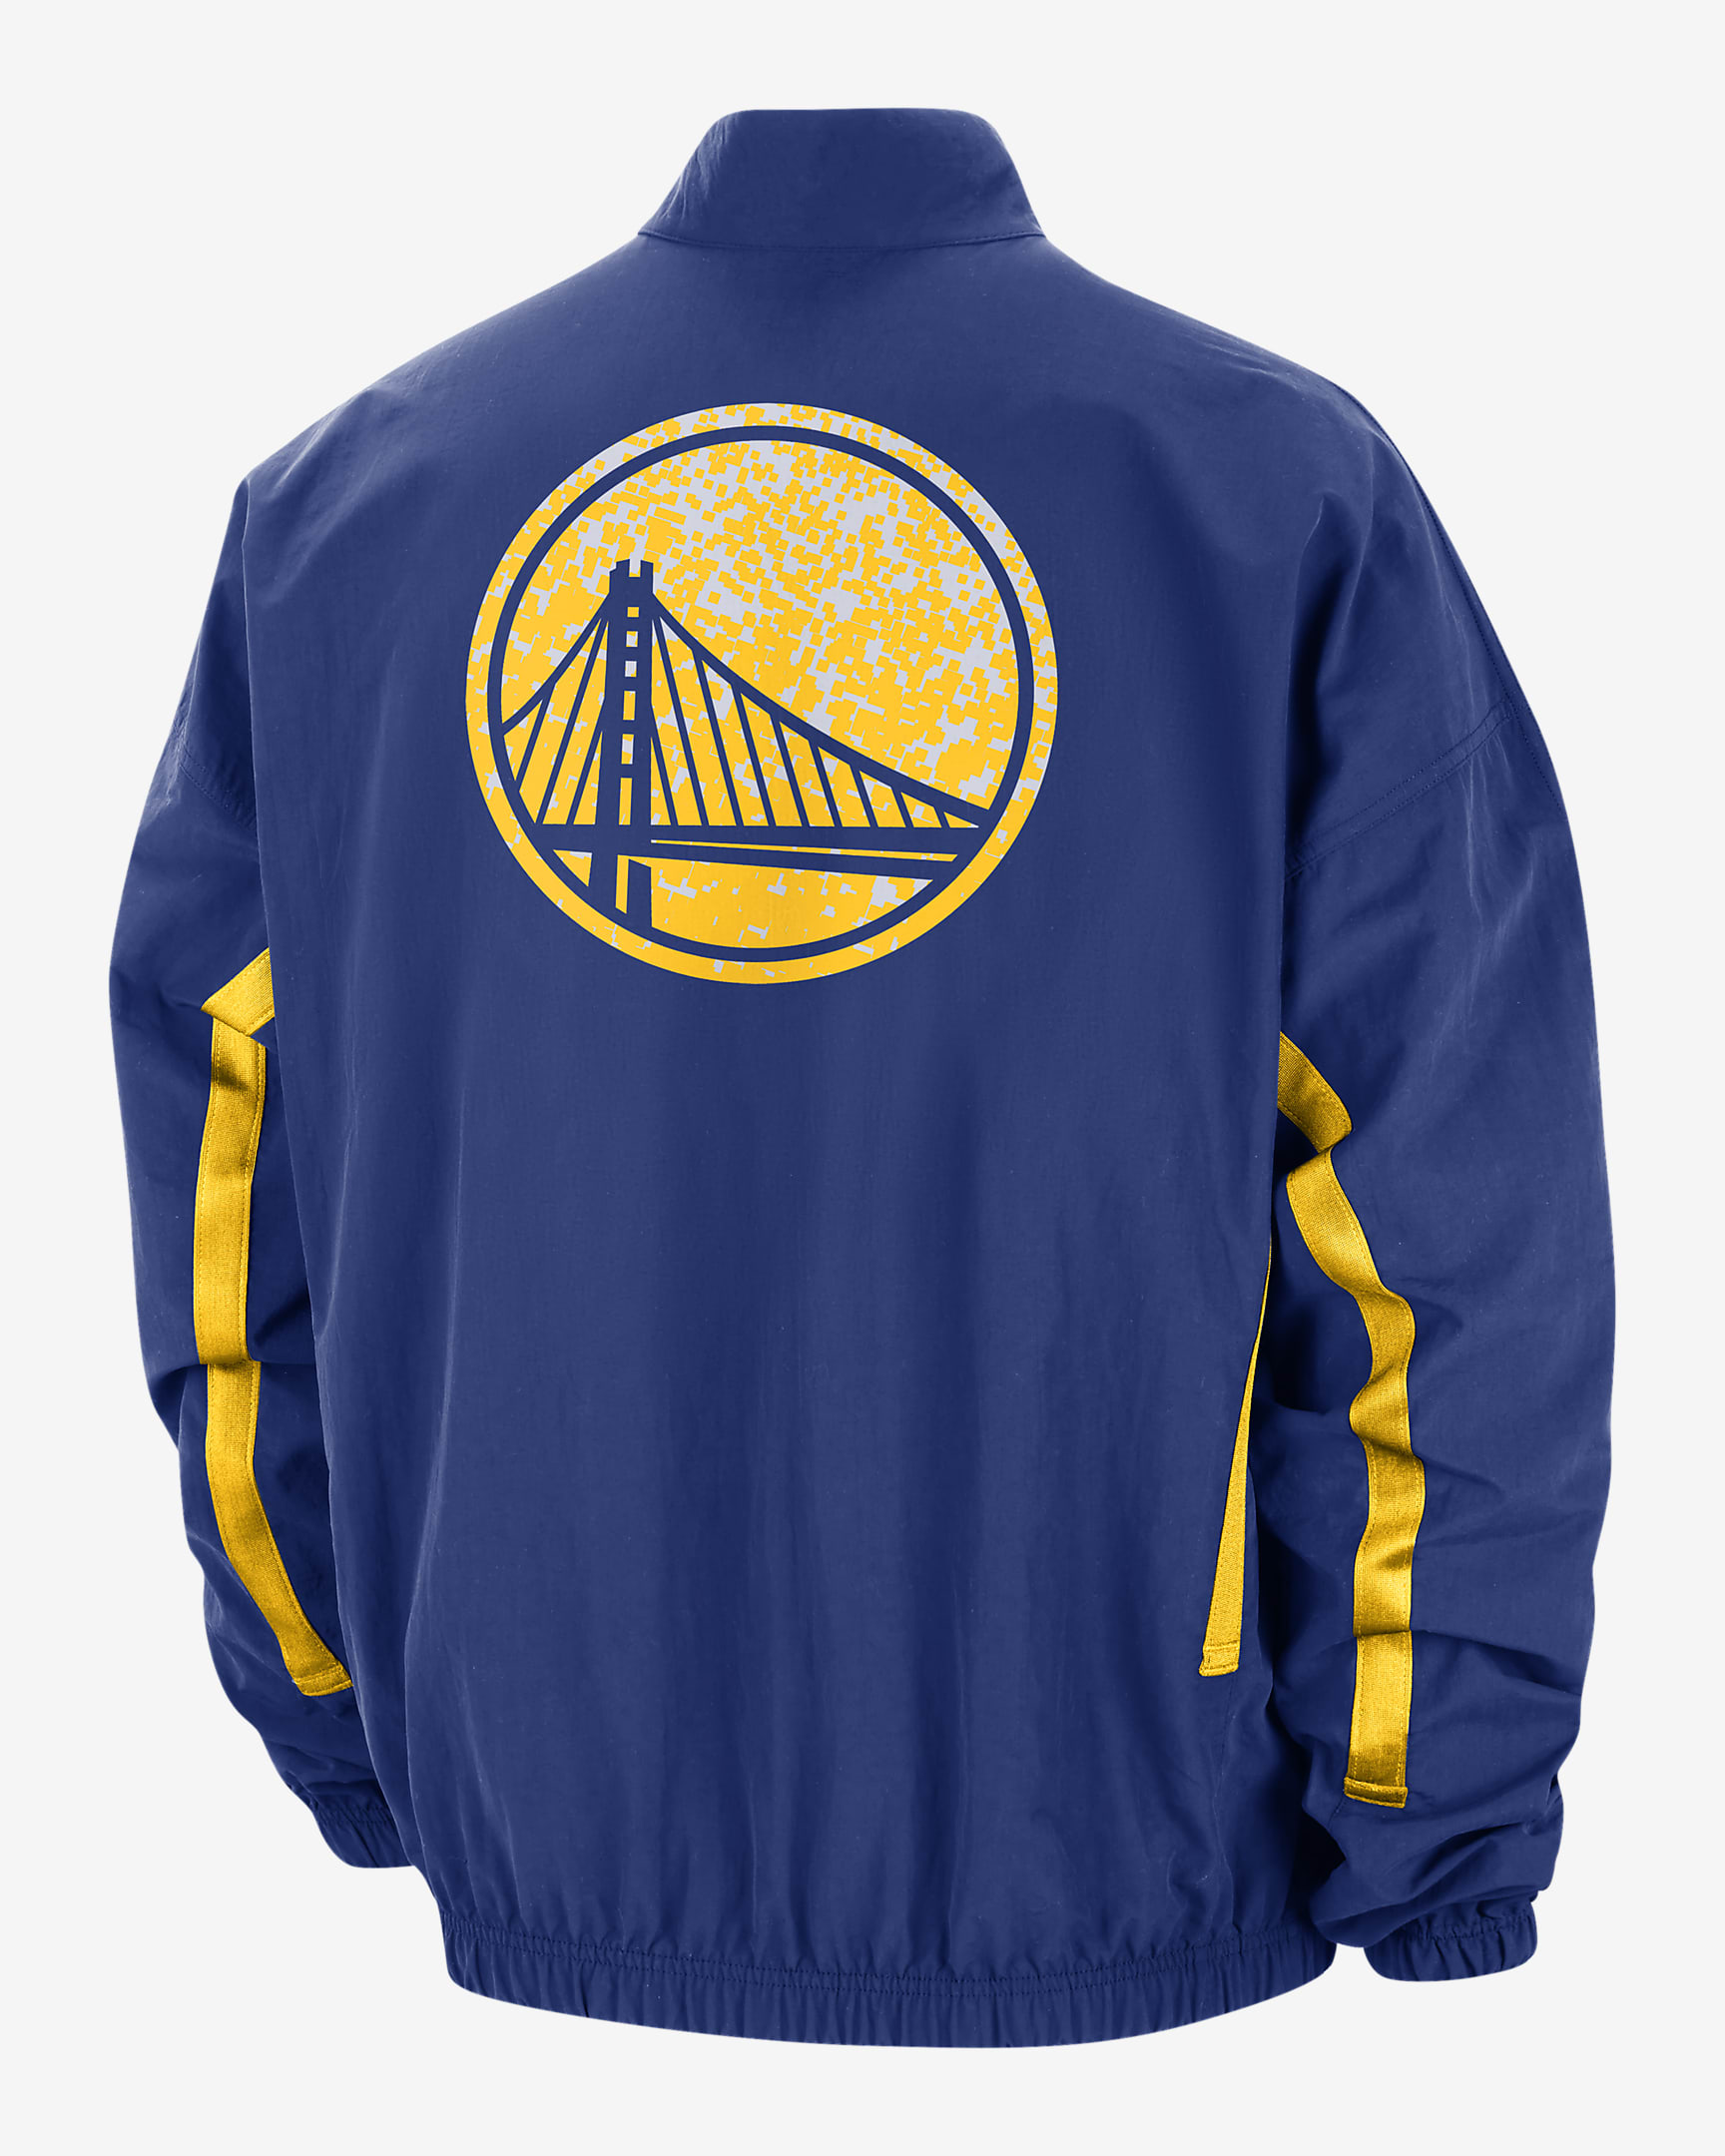 Golden State Warriors DNA Courtside Men's Nike NBA Woven Graphic Jacket ...